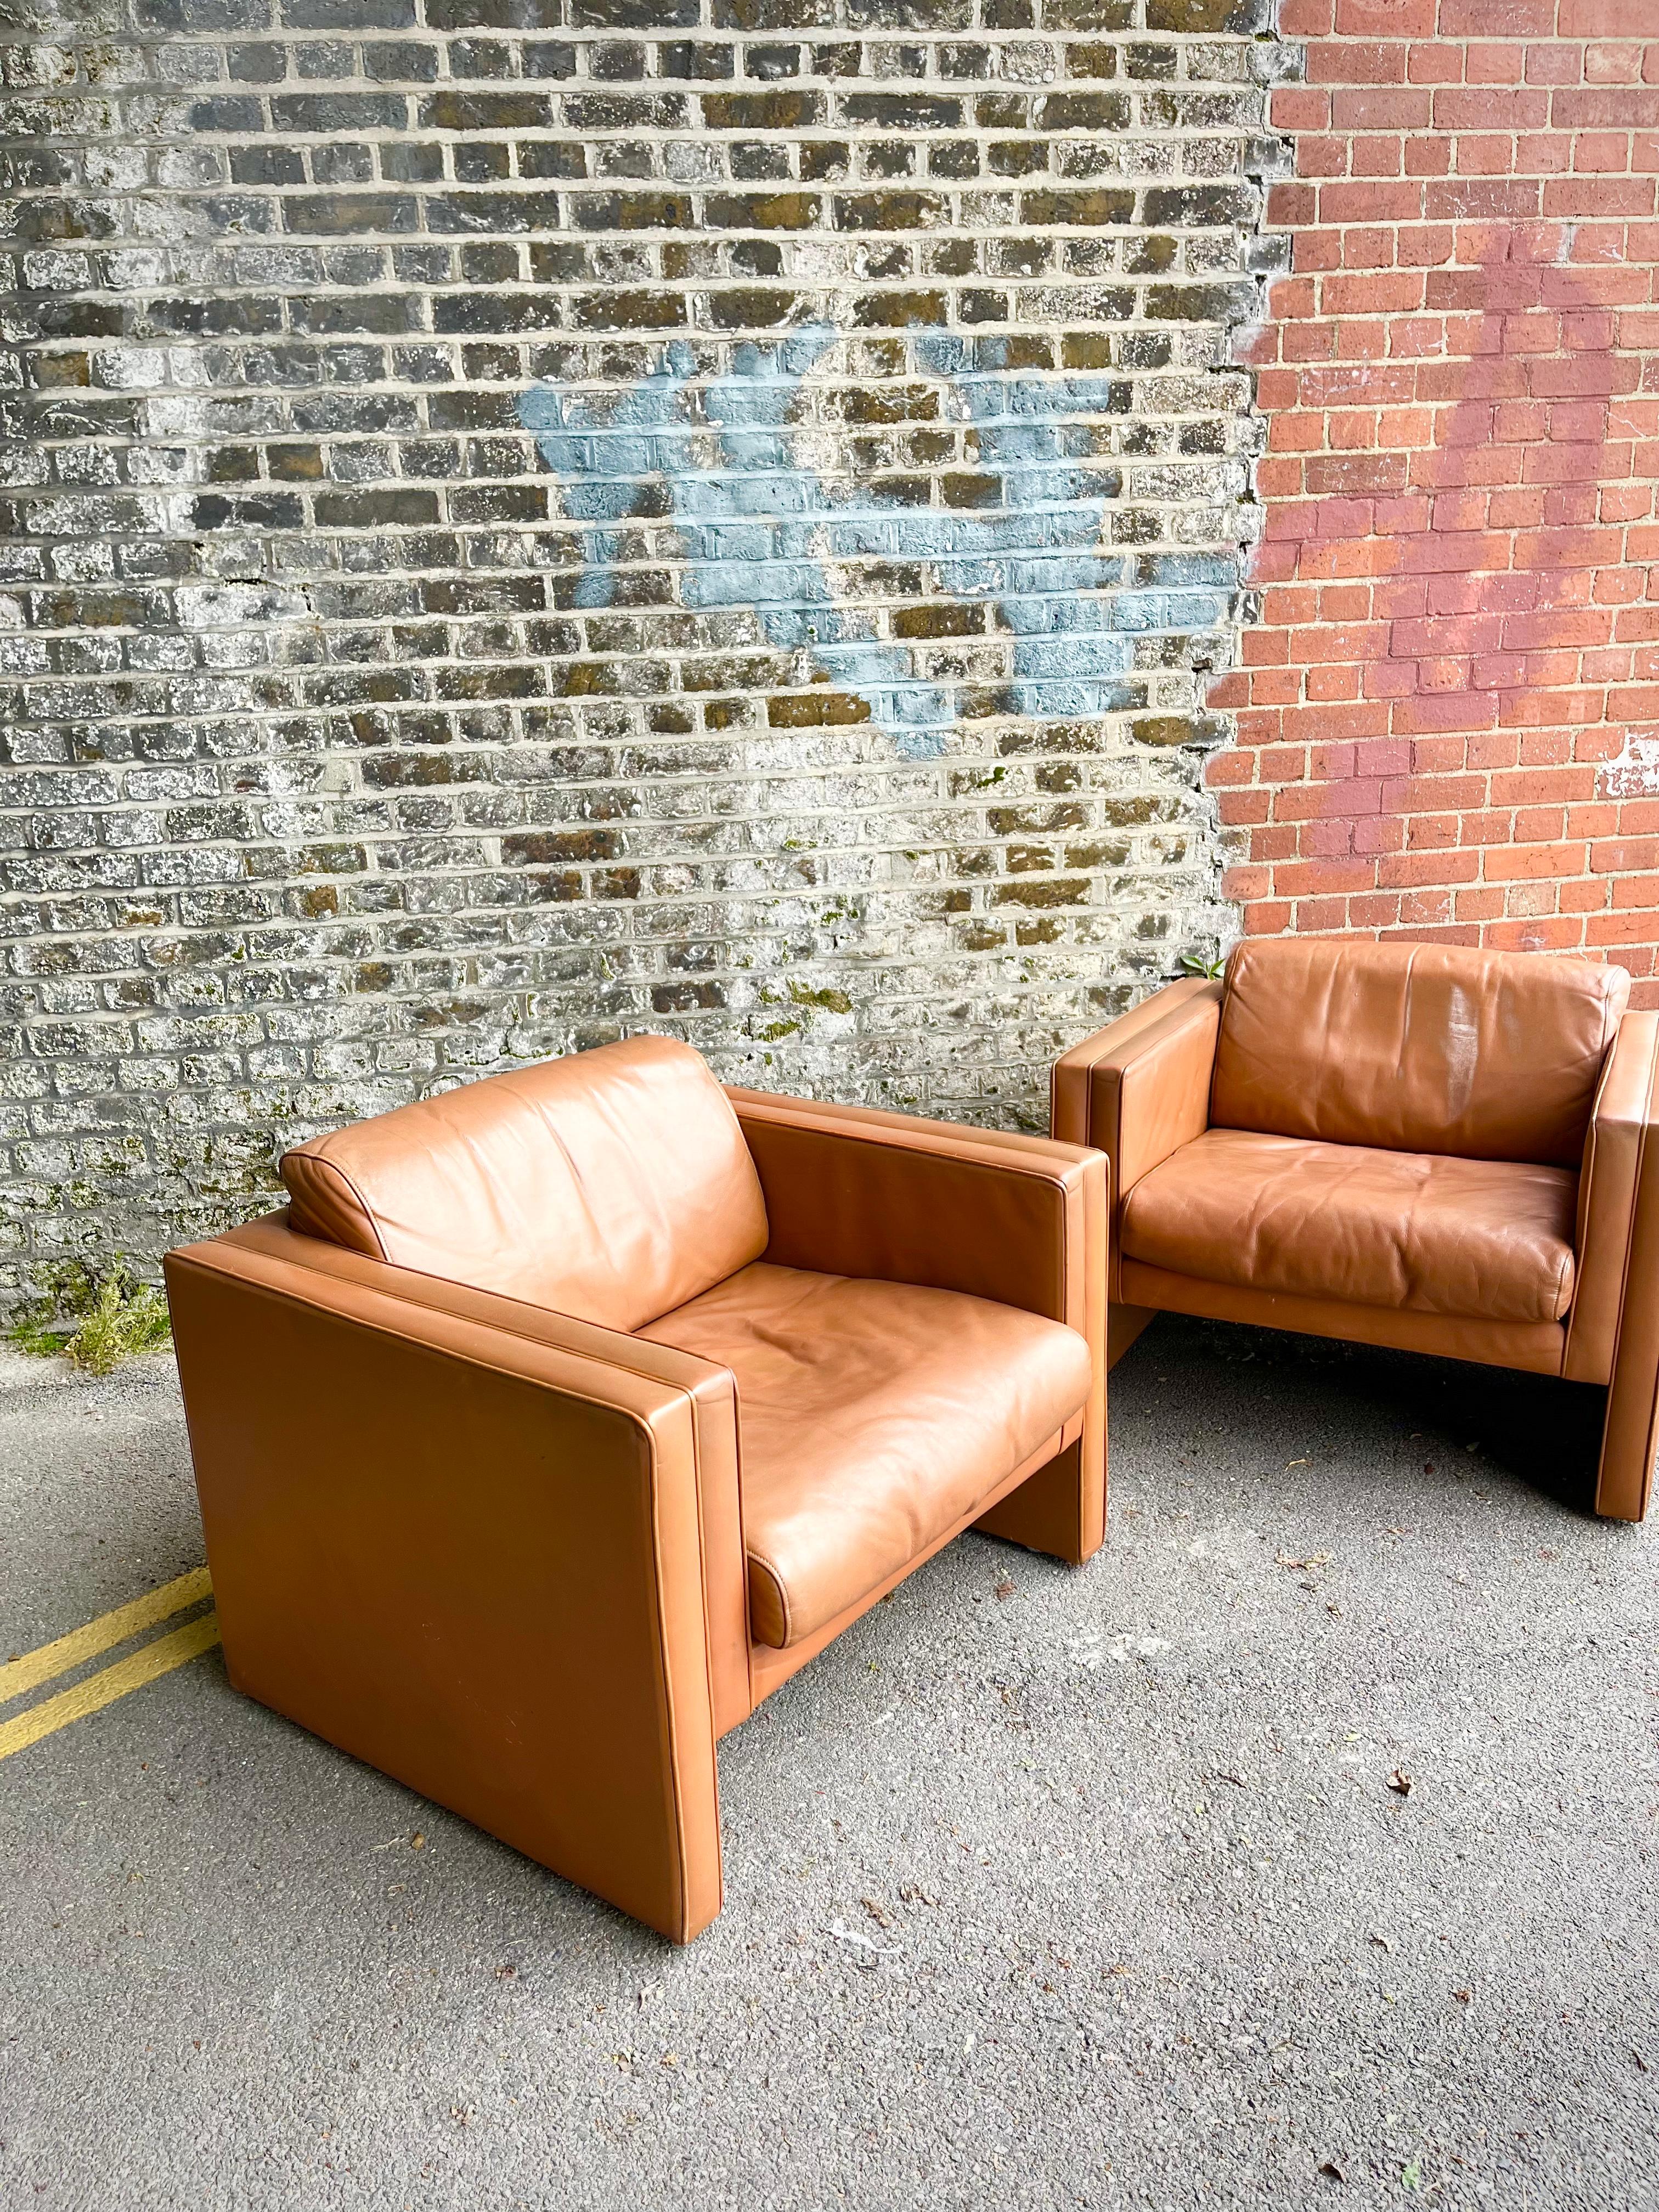 A super stylish pair of German modernists club chairs.
Produced in the 1970s by top furniture manufacturer Walter Knoll, these substantial chairs cut a mean shape with those twin-arms and that impressive cuboid design.
Extremely comfortable and well